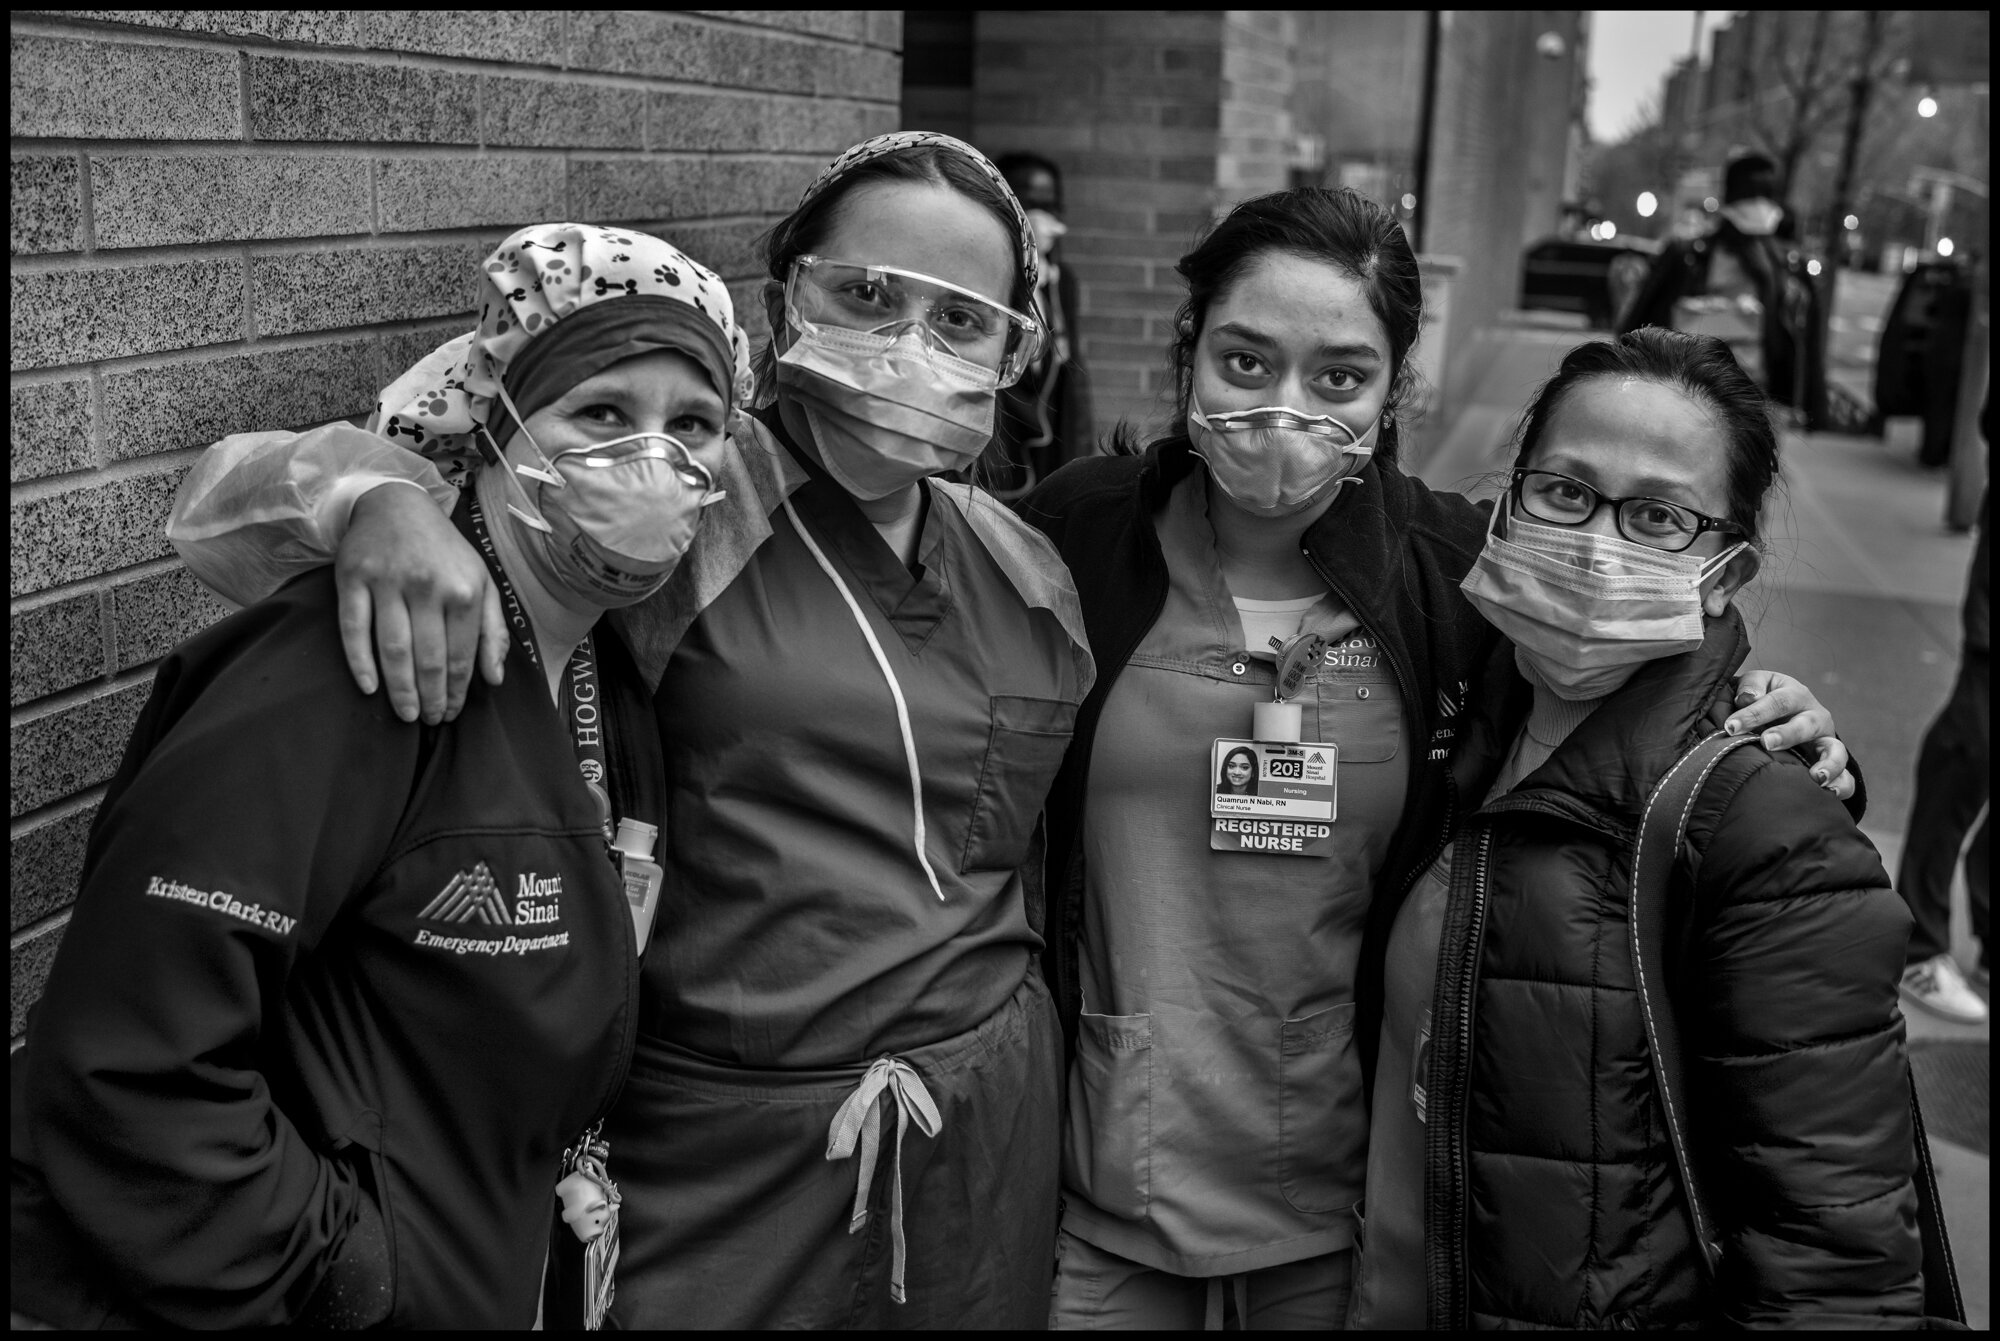  Bella, Kristen, Cameron, and Rachel are all nurses at Mount Sinai, Hospital currently working with coronavirus patients. They stood outside the hospital at 7pm as the firemen from FDNY Truck 43 “El Barrio’s Bravest”, cheered and applauded their grat